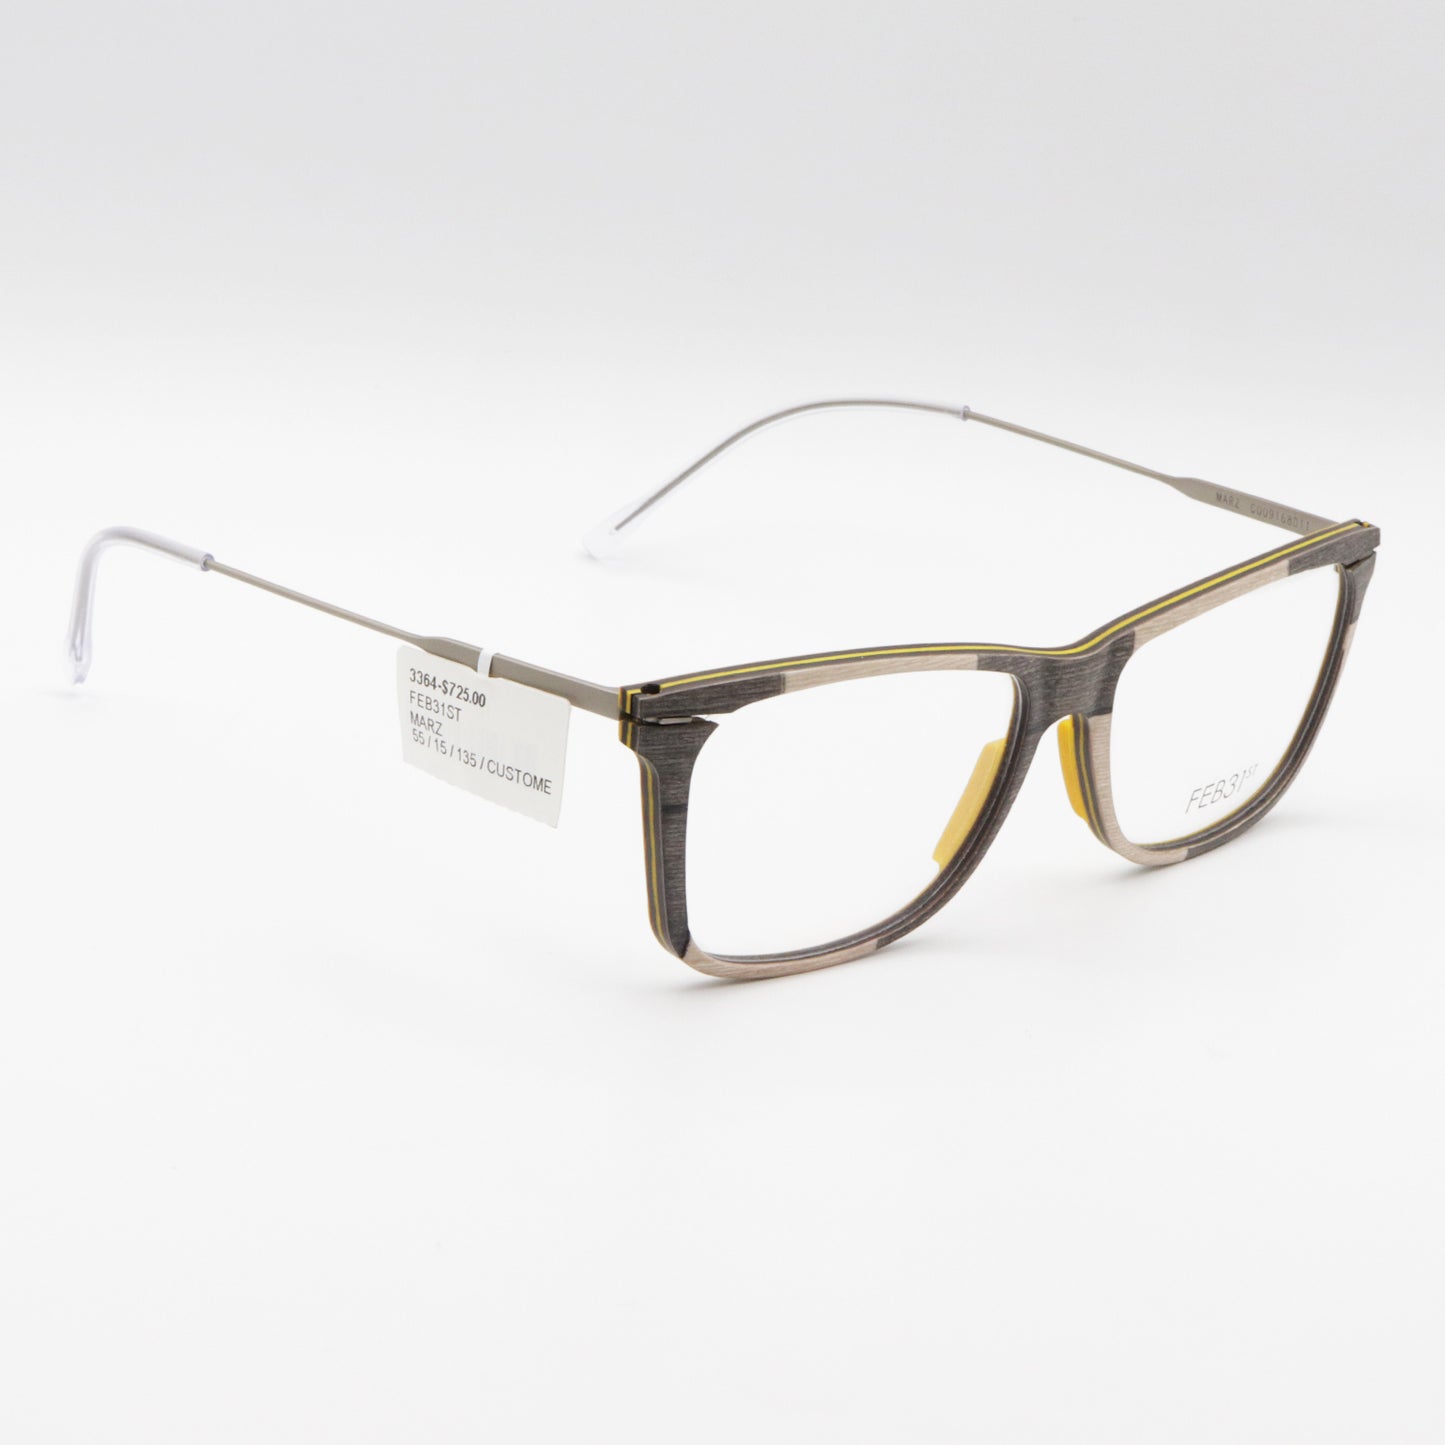 Marz by FEB31st wooden glasses Brown and Yellow